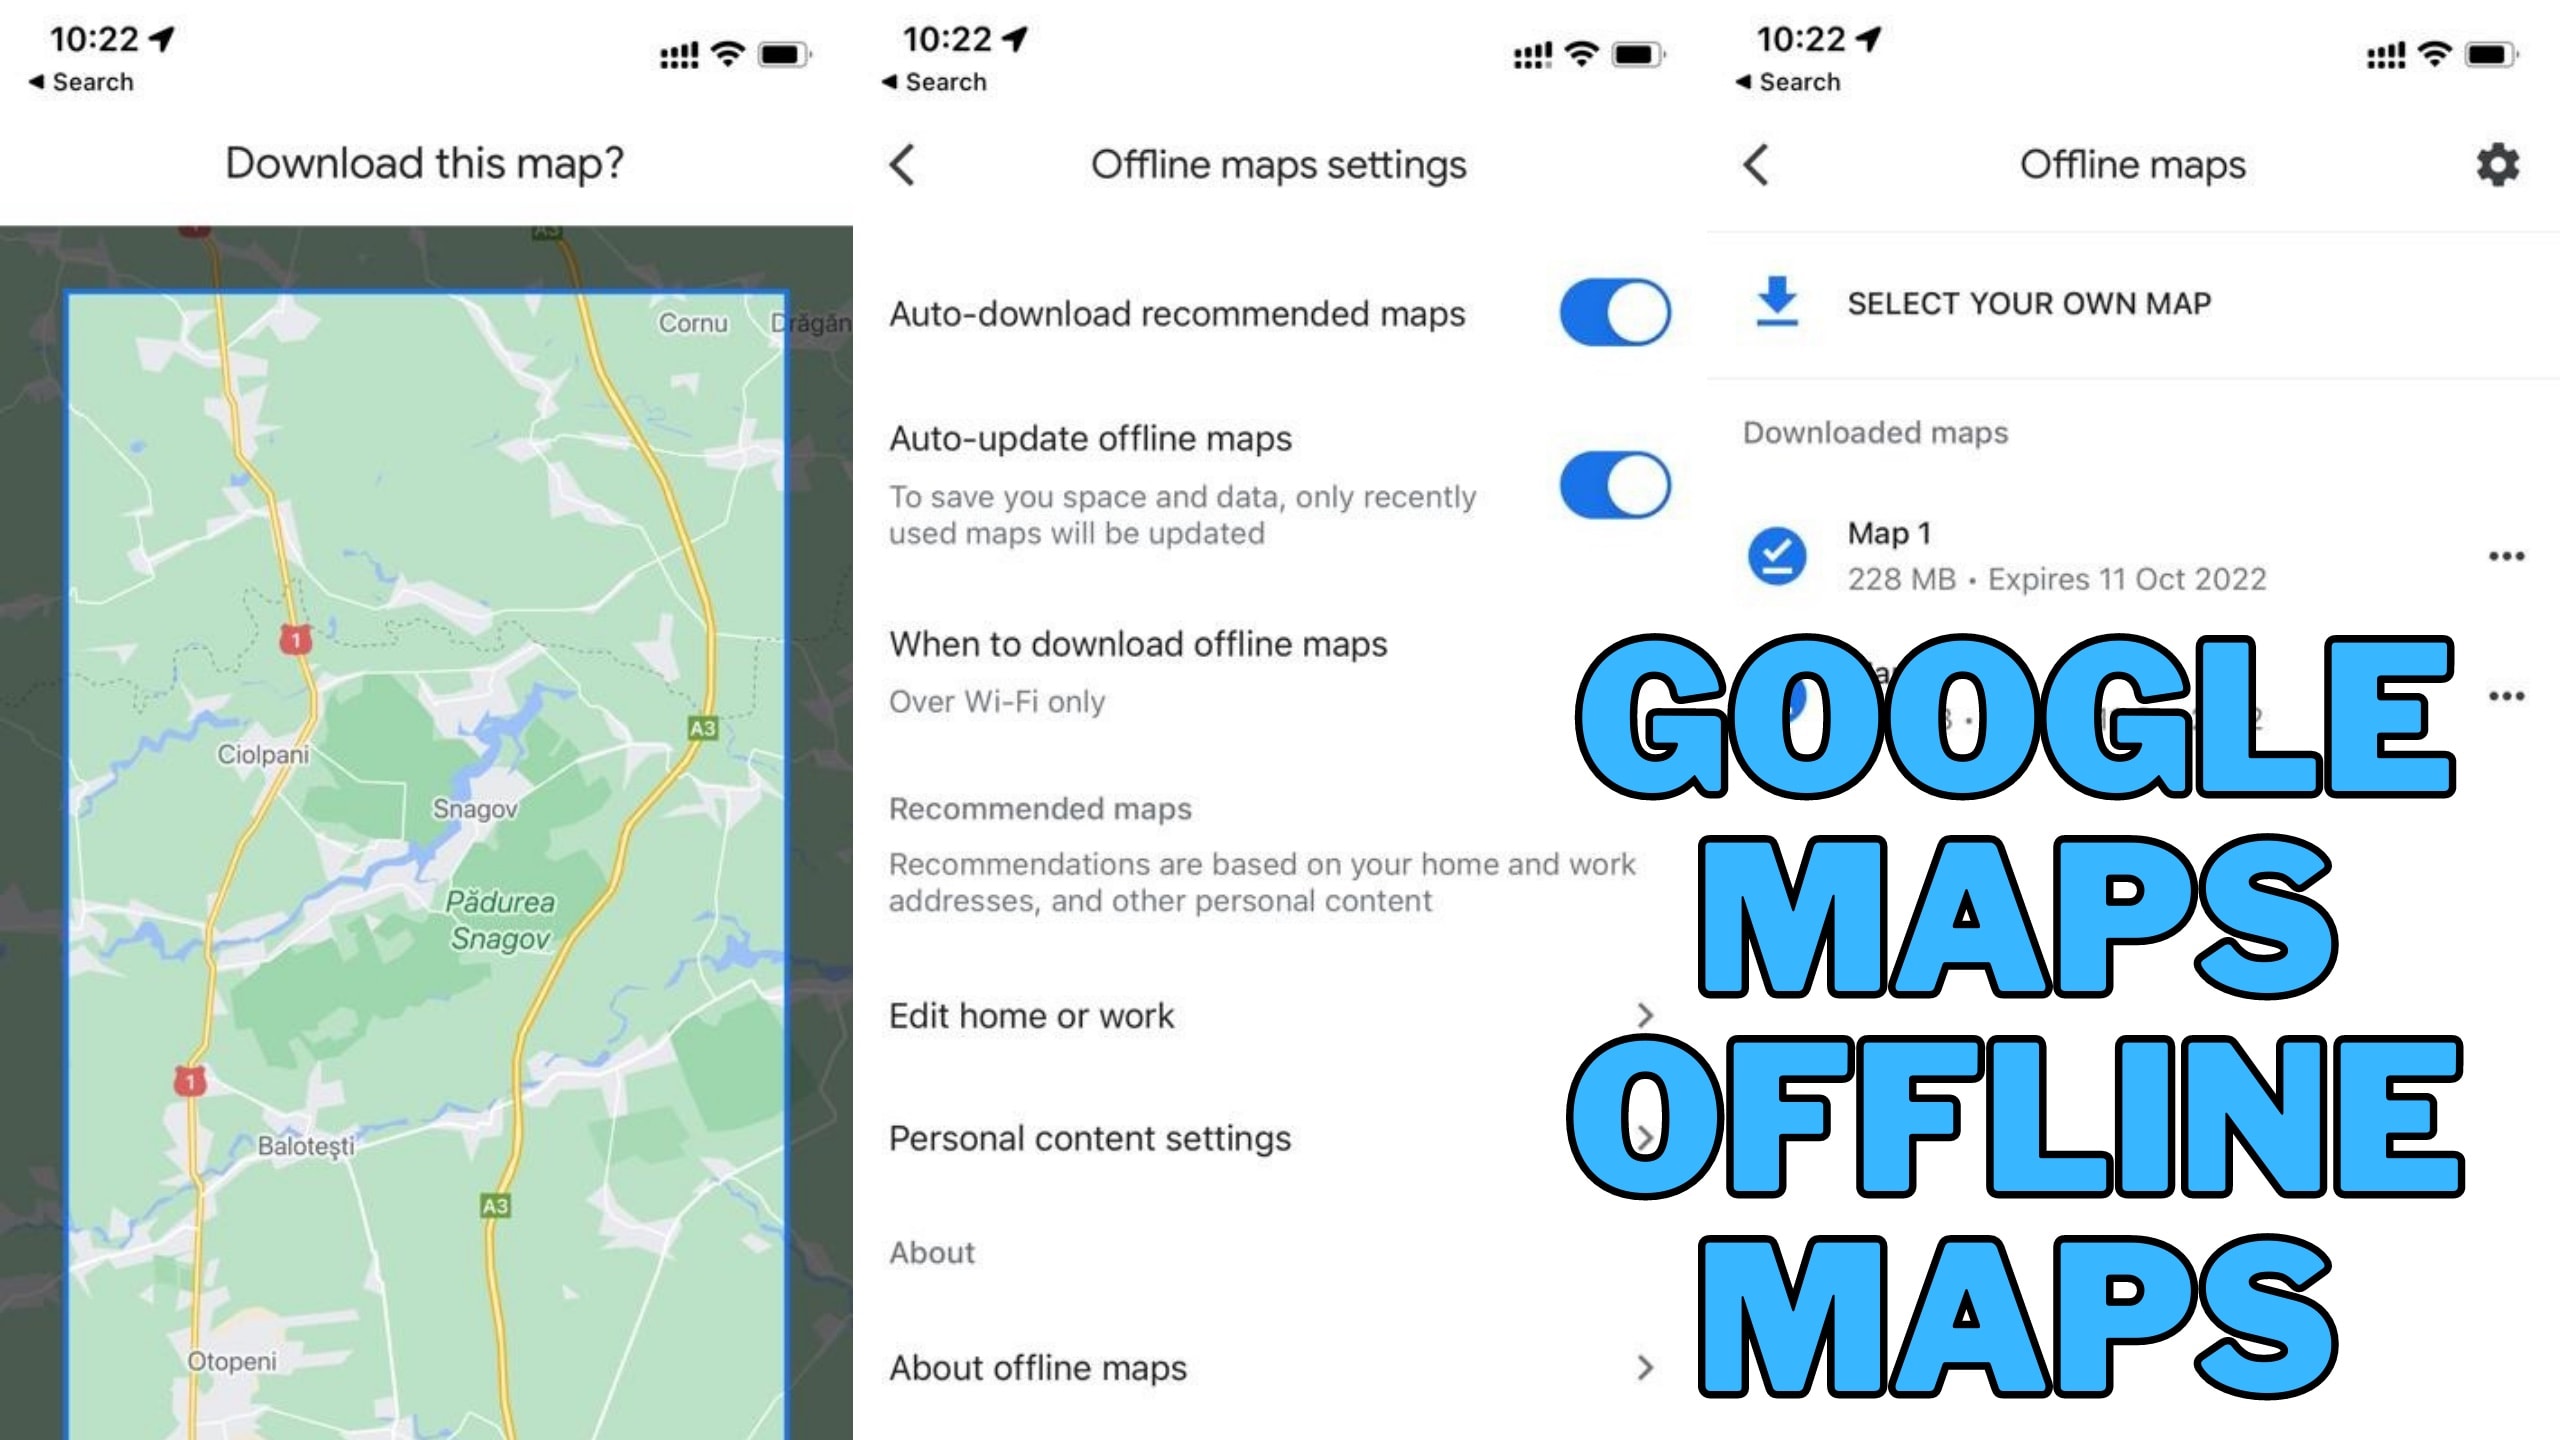 Google Maps Will Make Its Rivals Look Ridiculous If This Offline Maps Feature Launches 217259 1 